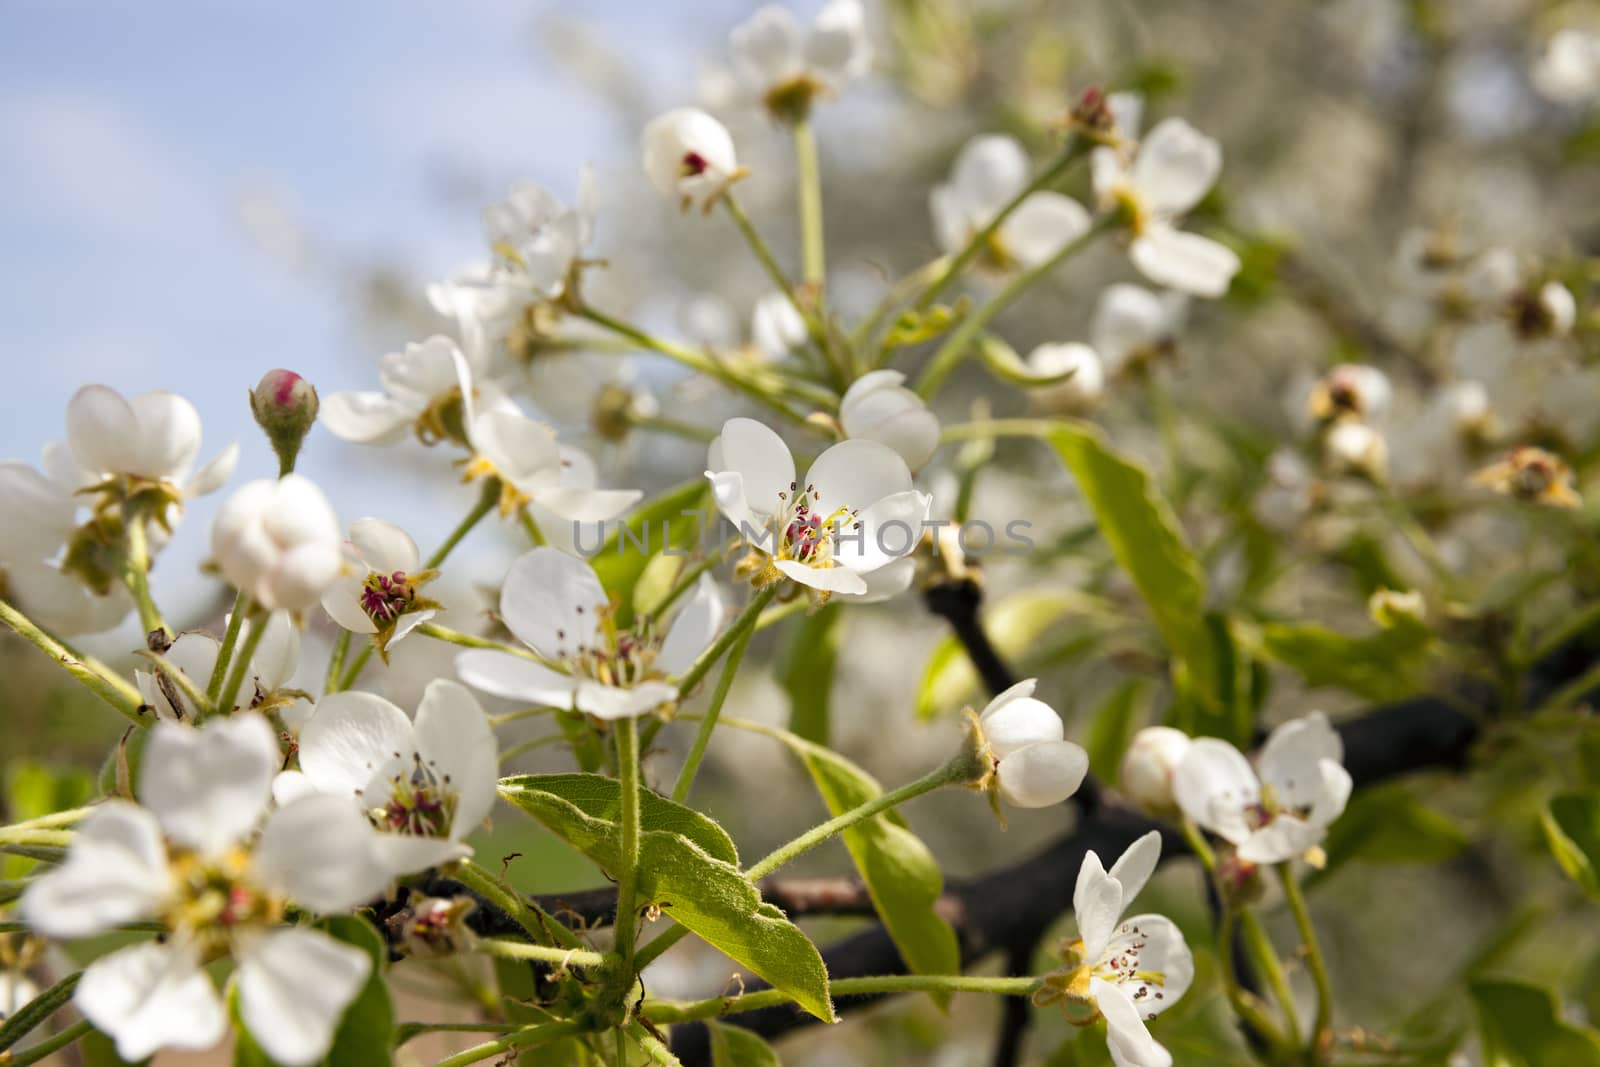  the small flowers of an apple-tree photographed by a close up. small depth of sharpness